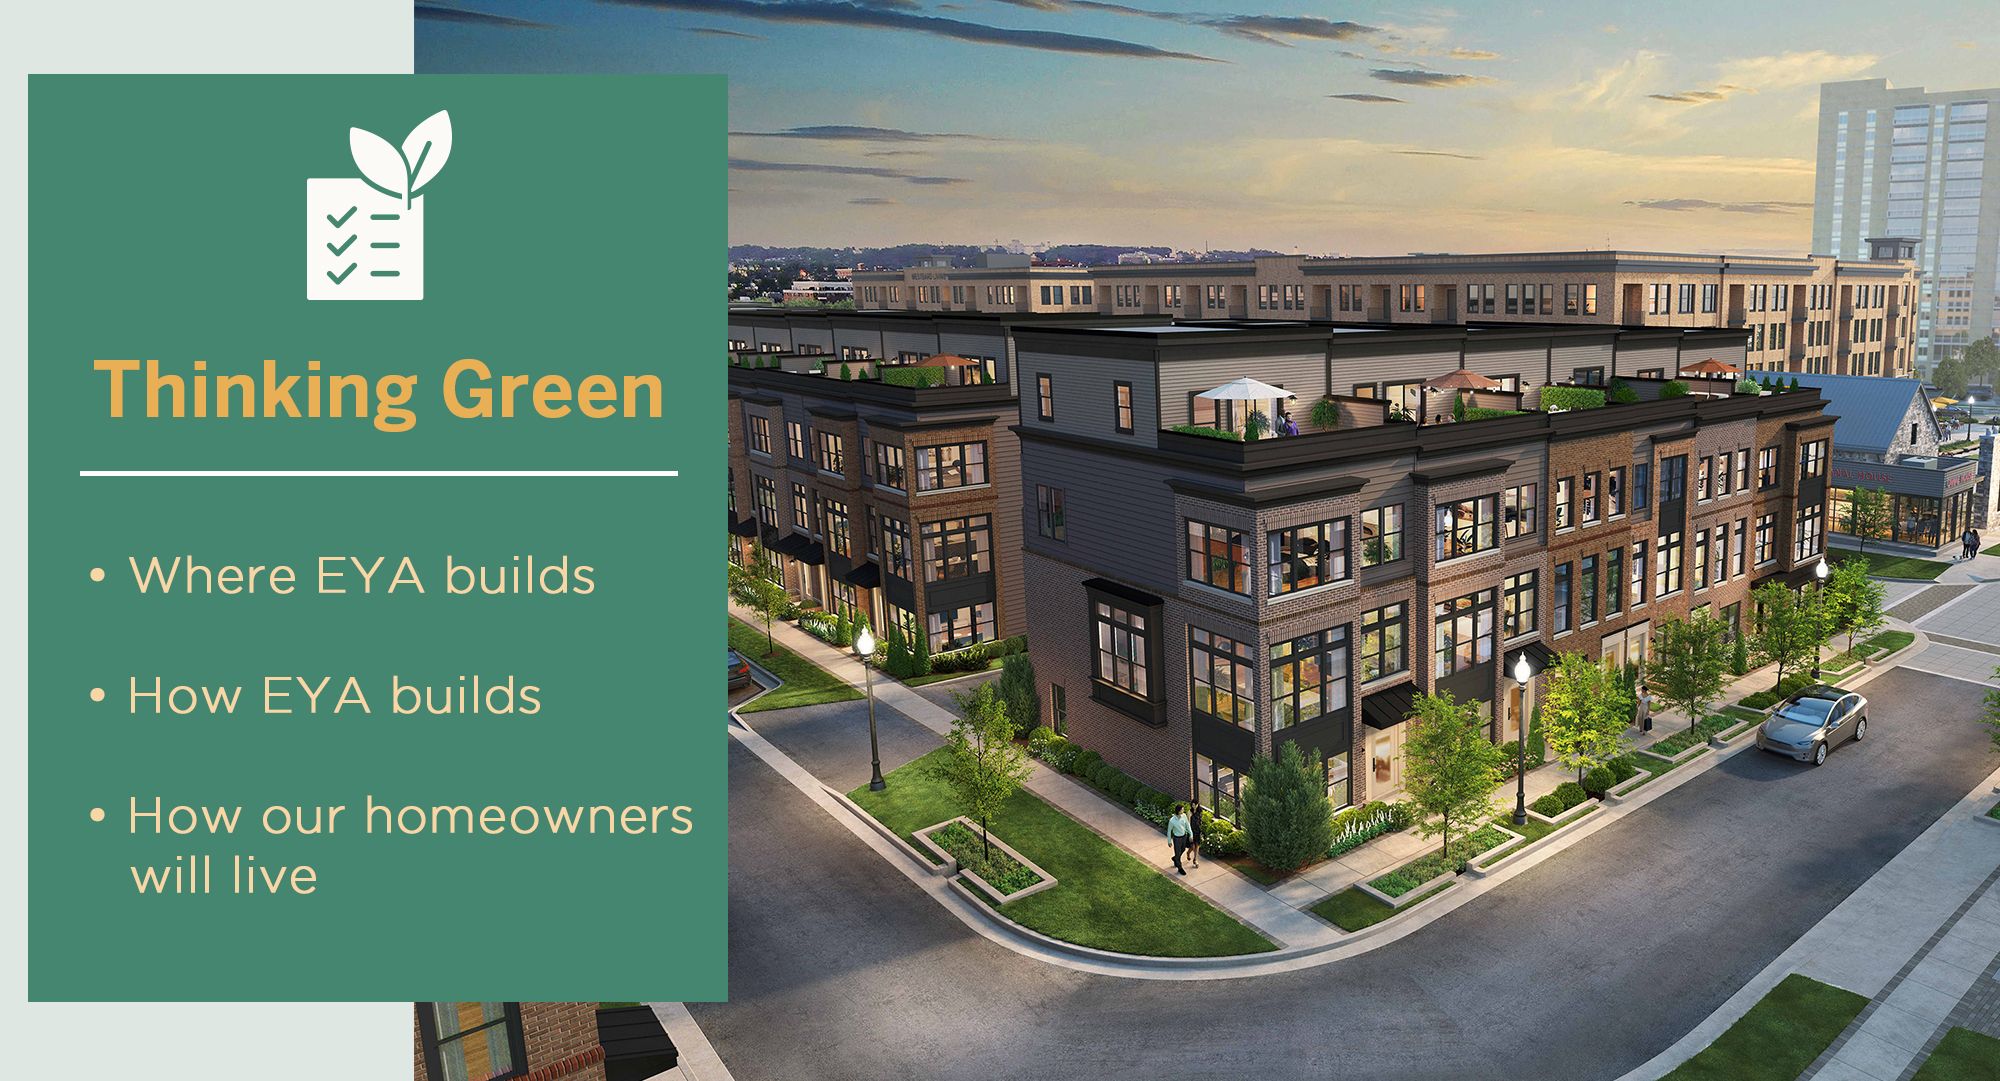 Thinking green: EYA's approach to building sustainable neighborhoods